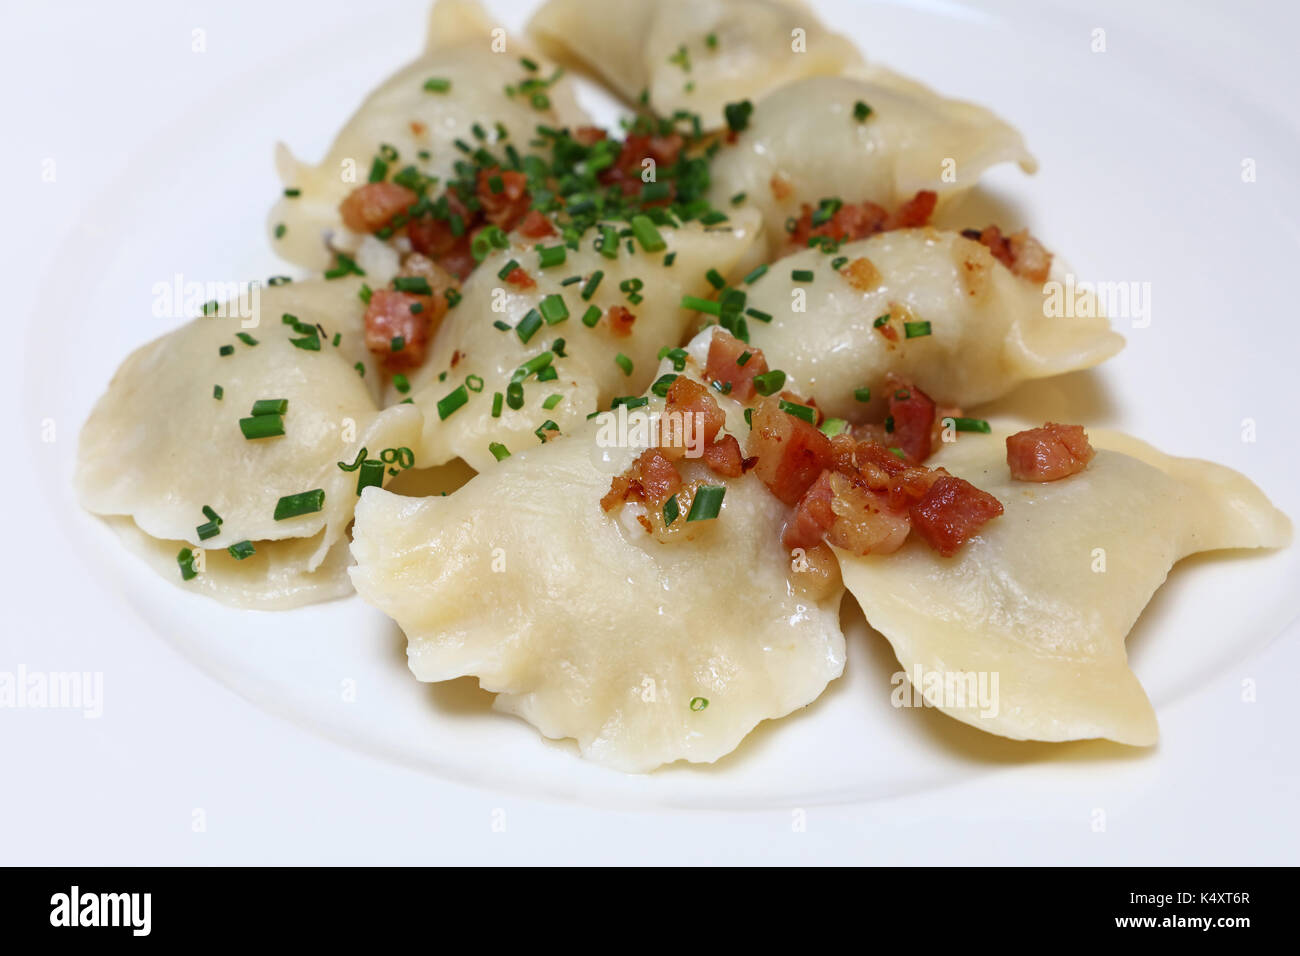 Plate of pierogi or varenyky stuffed filled dumplings with bacon and green chive onion, traditional East Europe cuisine meal popular in Poland, Ukrain Stock Photo